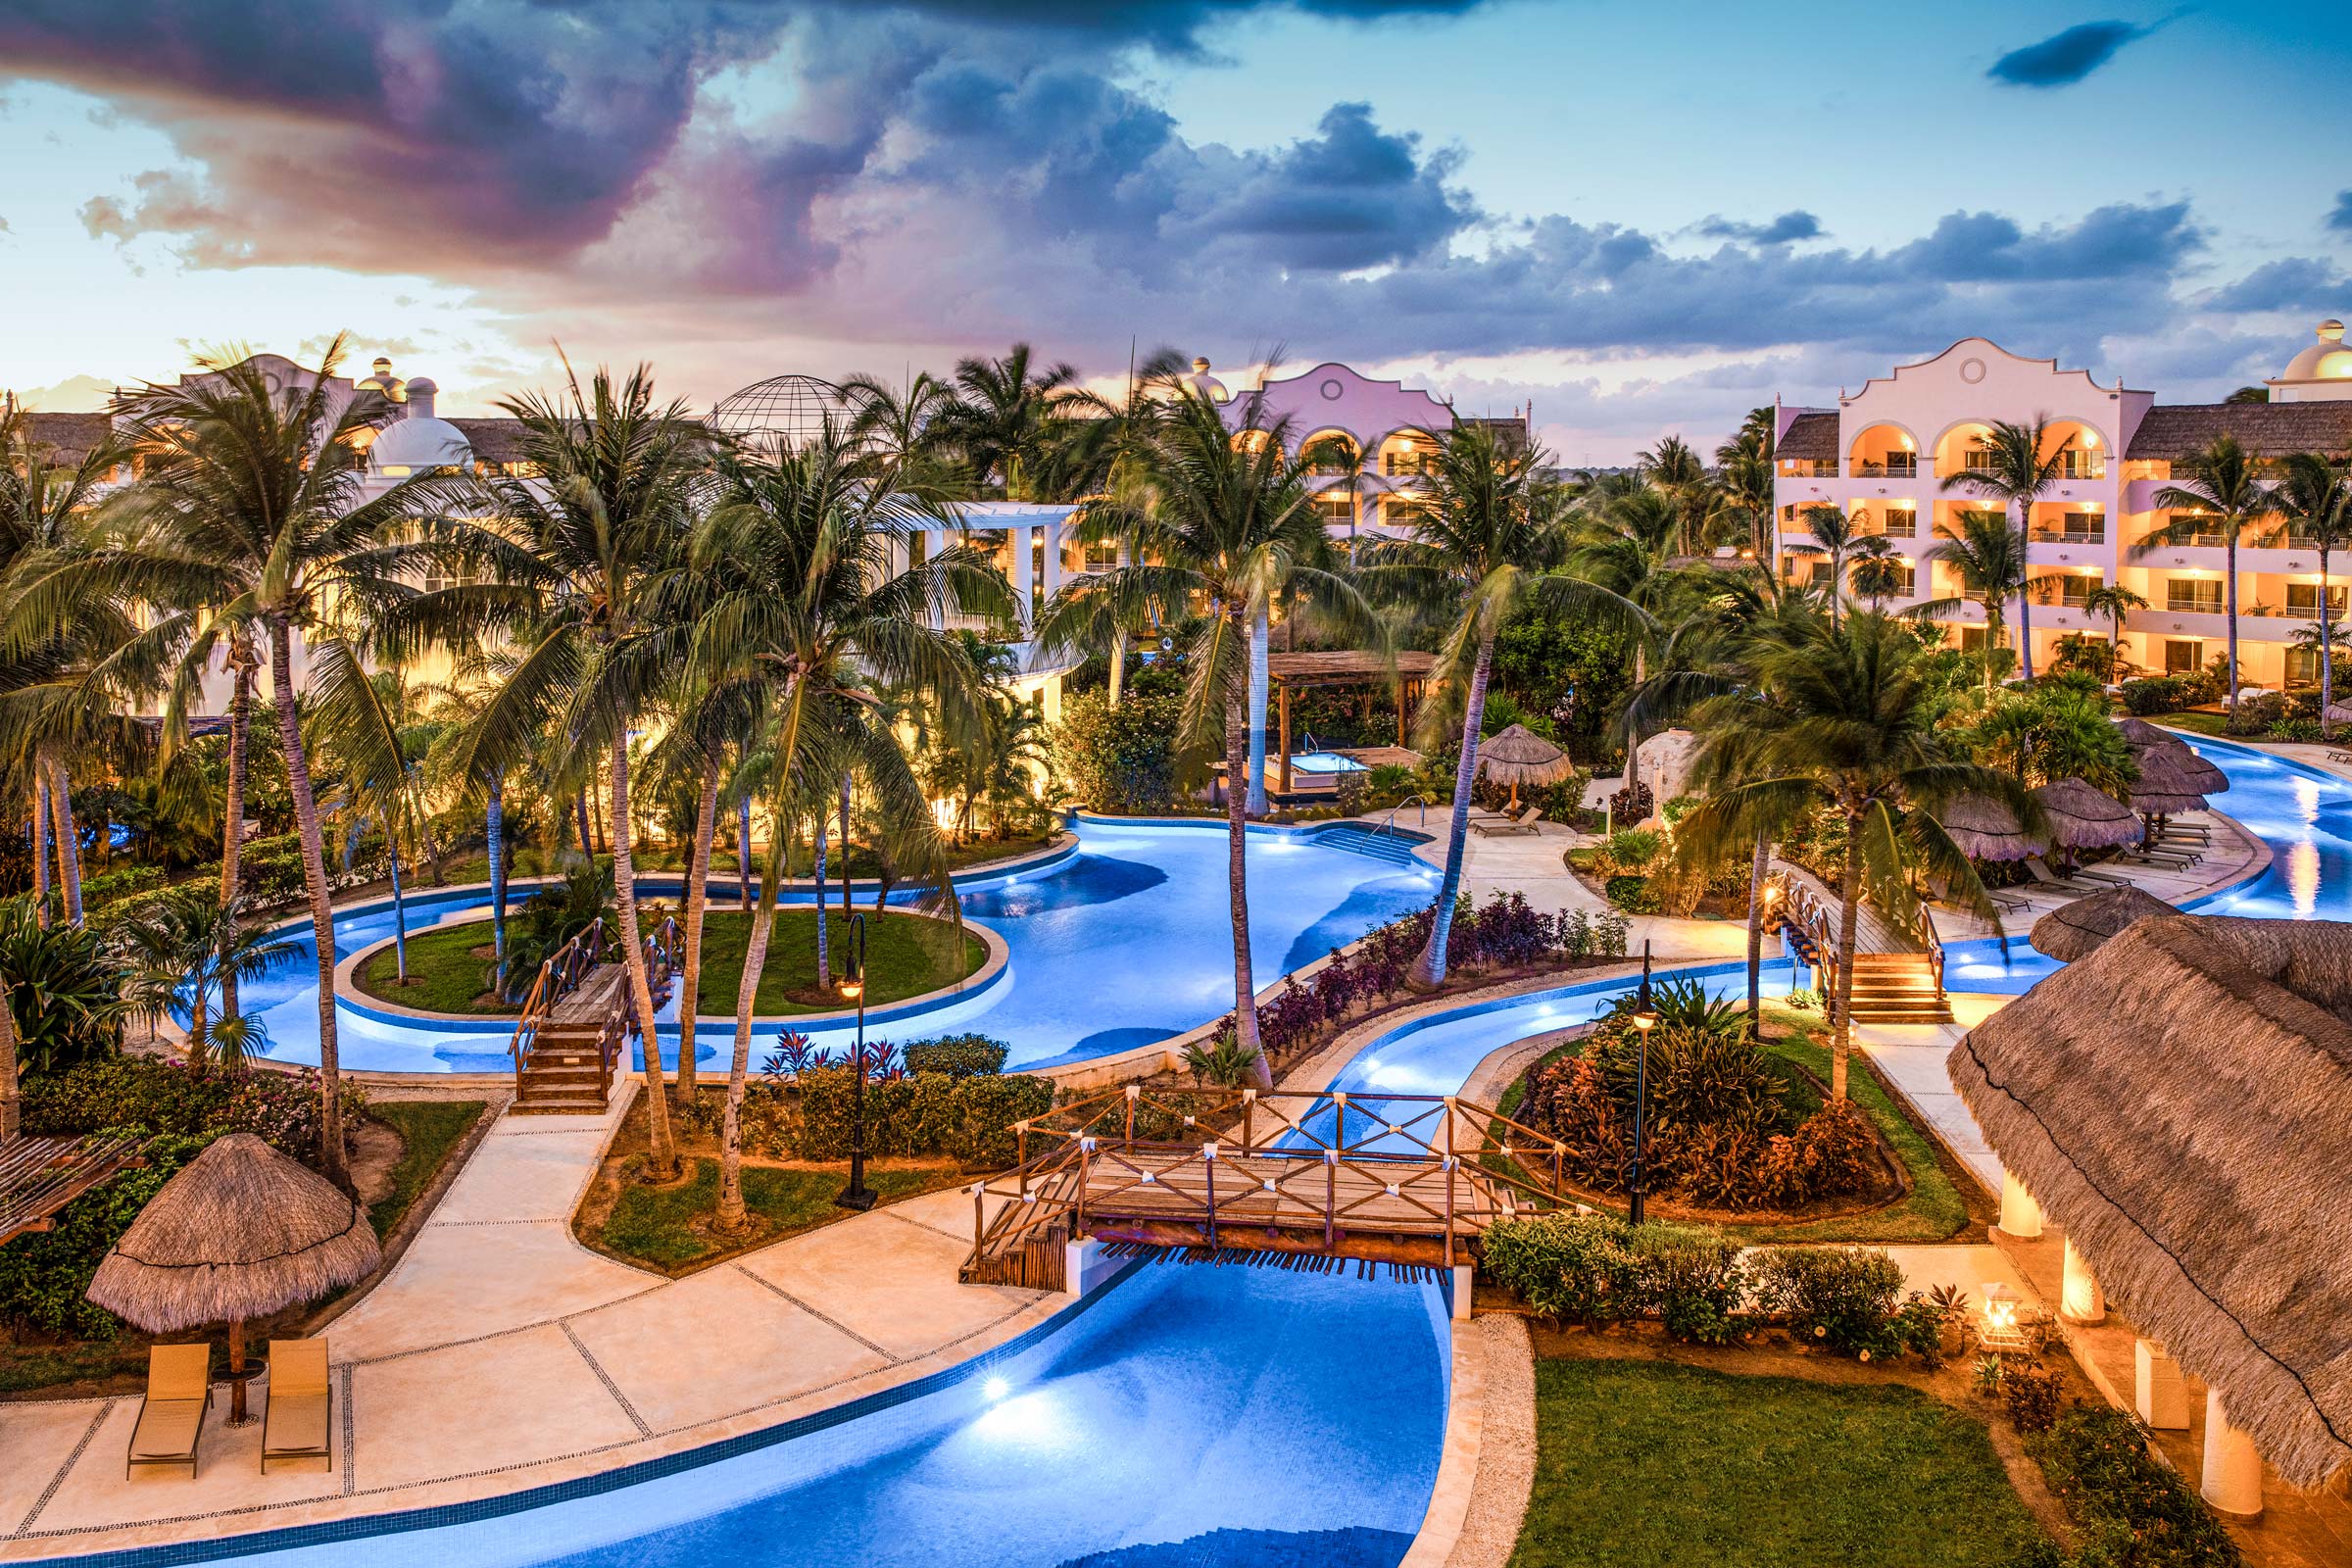 Sunset at Excellence Riviera Cancun